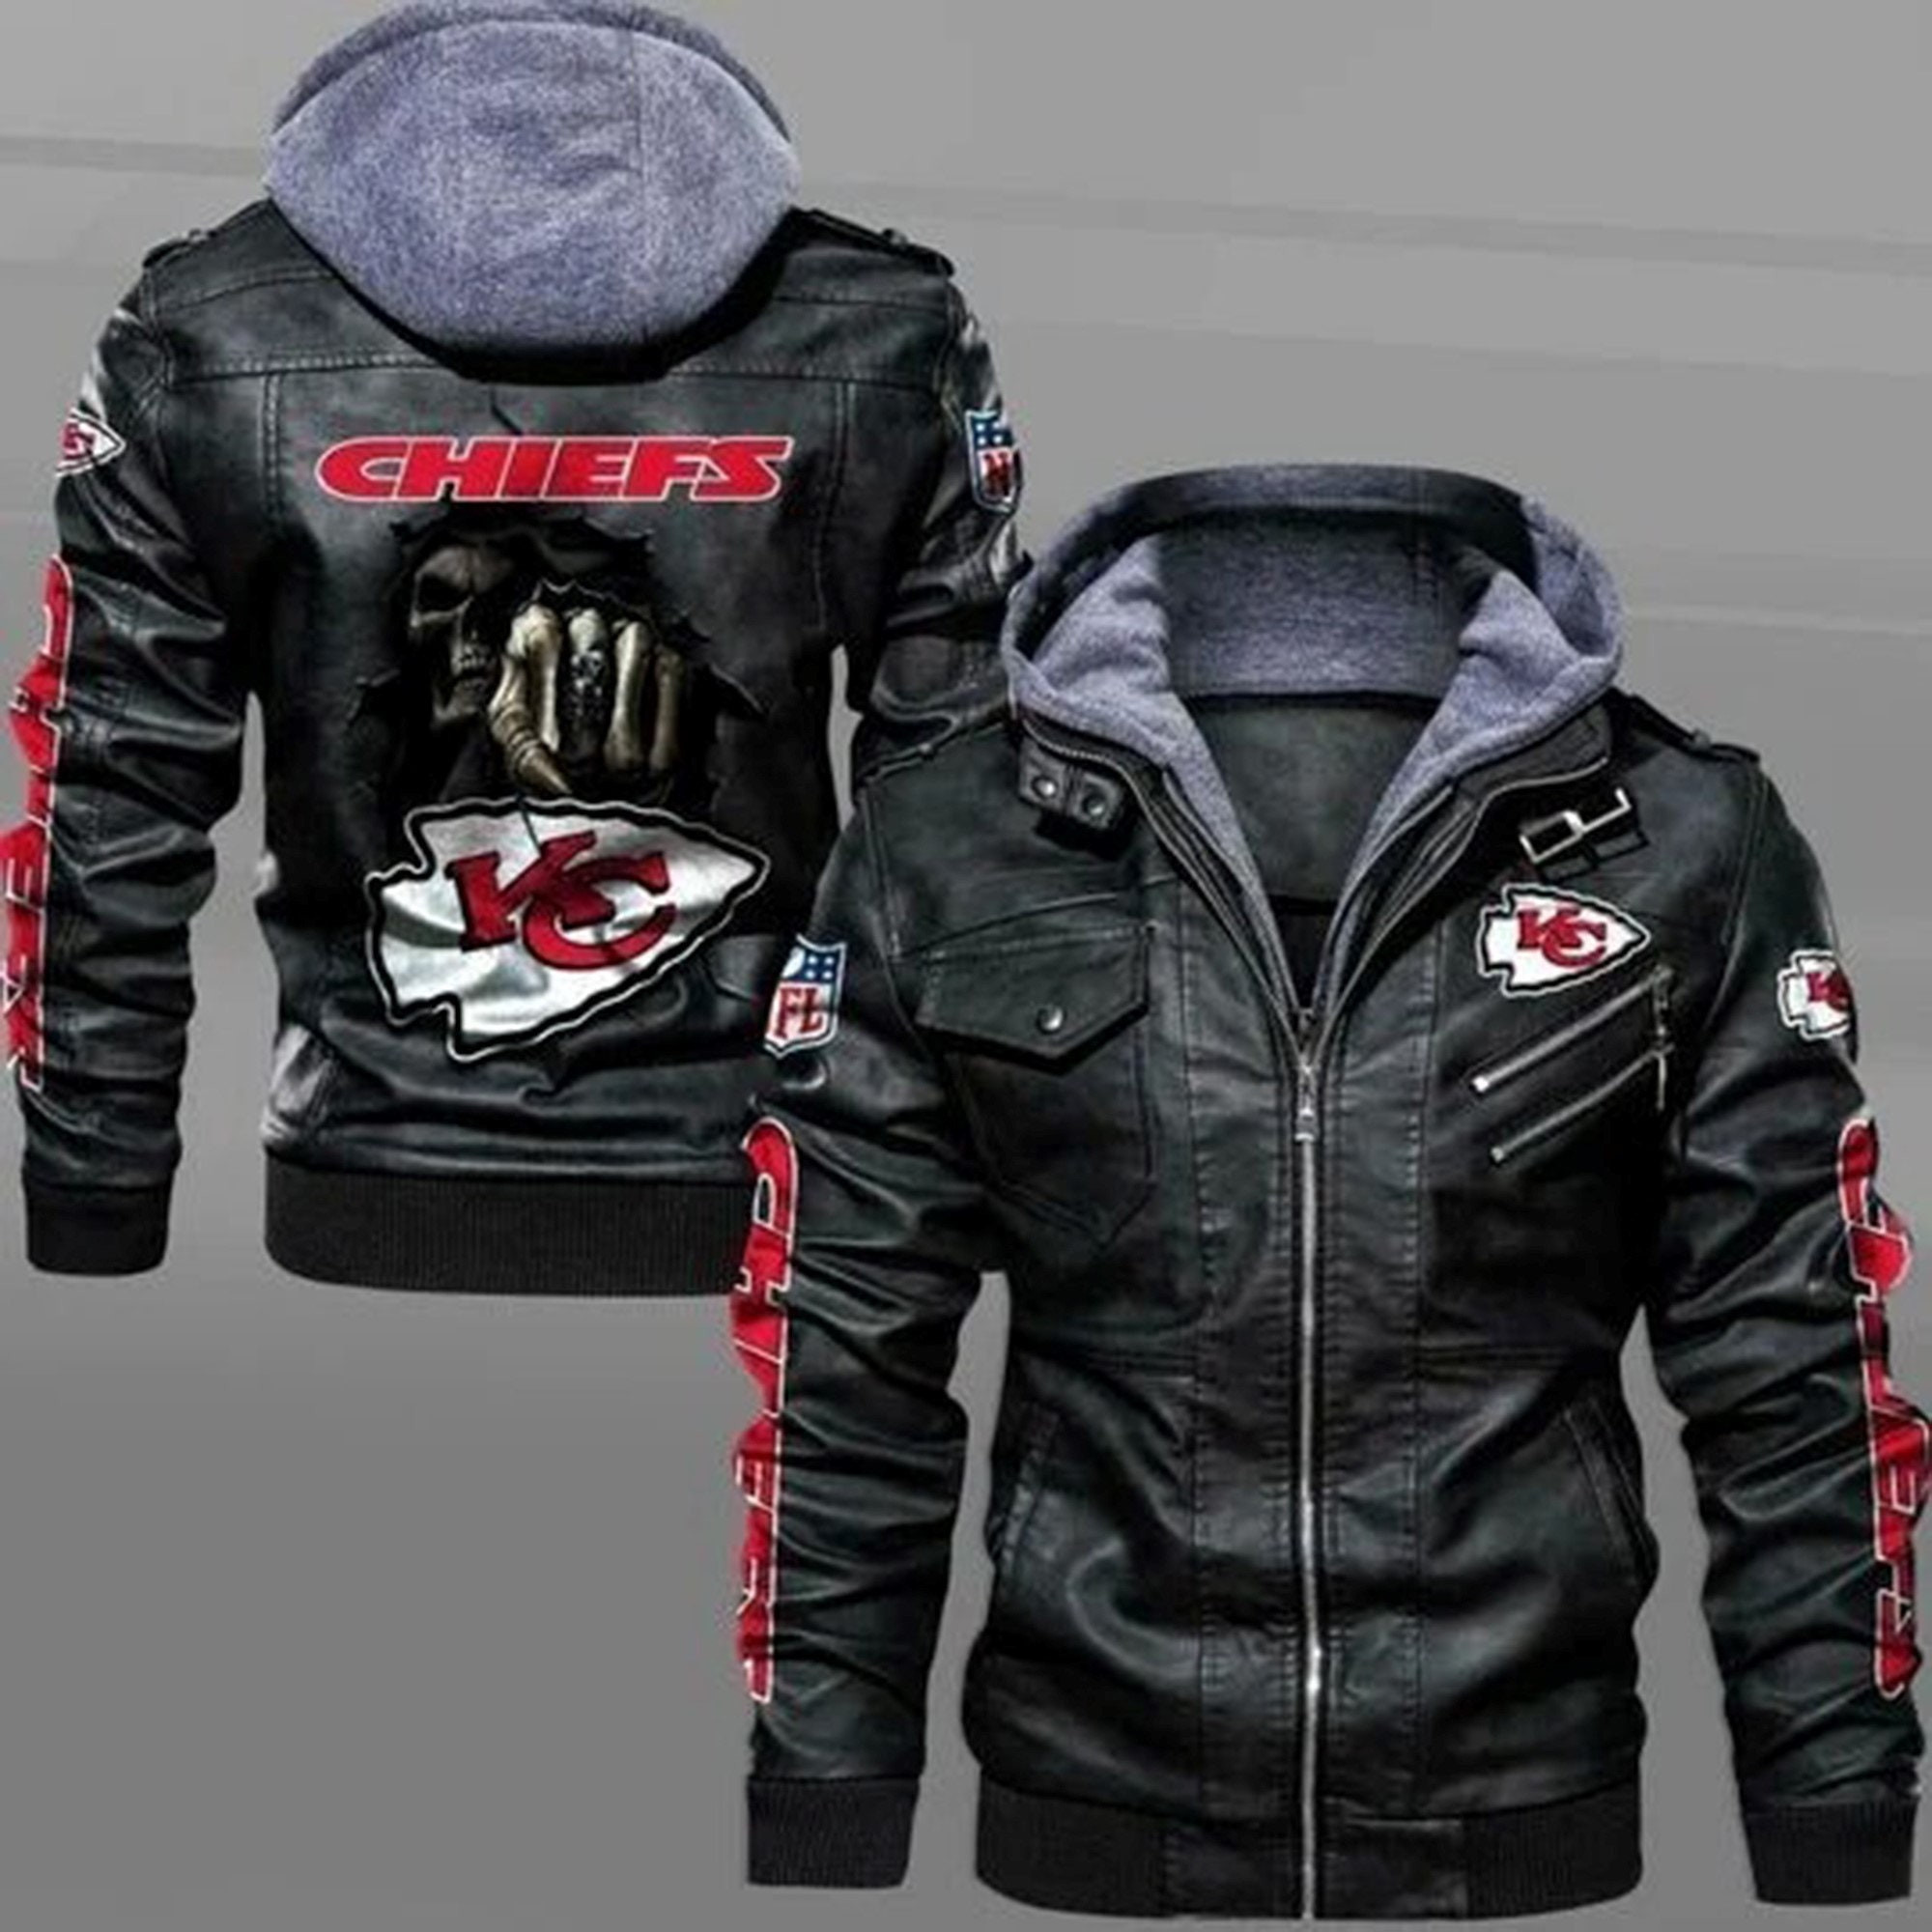 These Amazing Leather Jacket will add to the appeal of your outfit 163